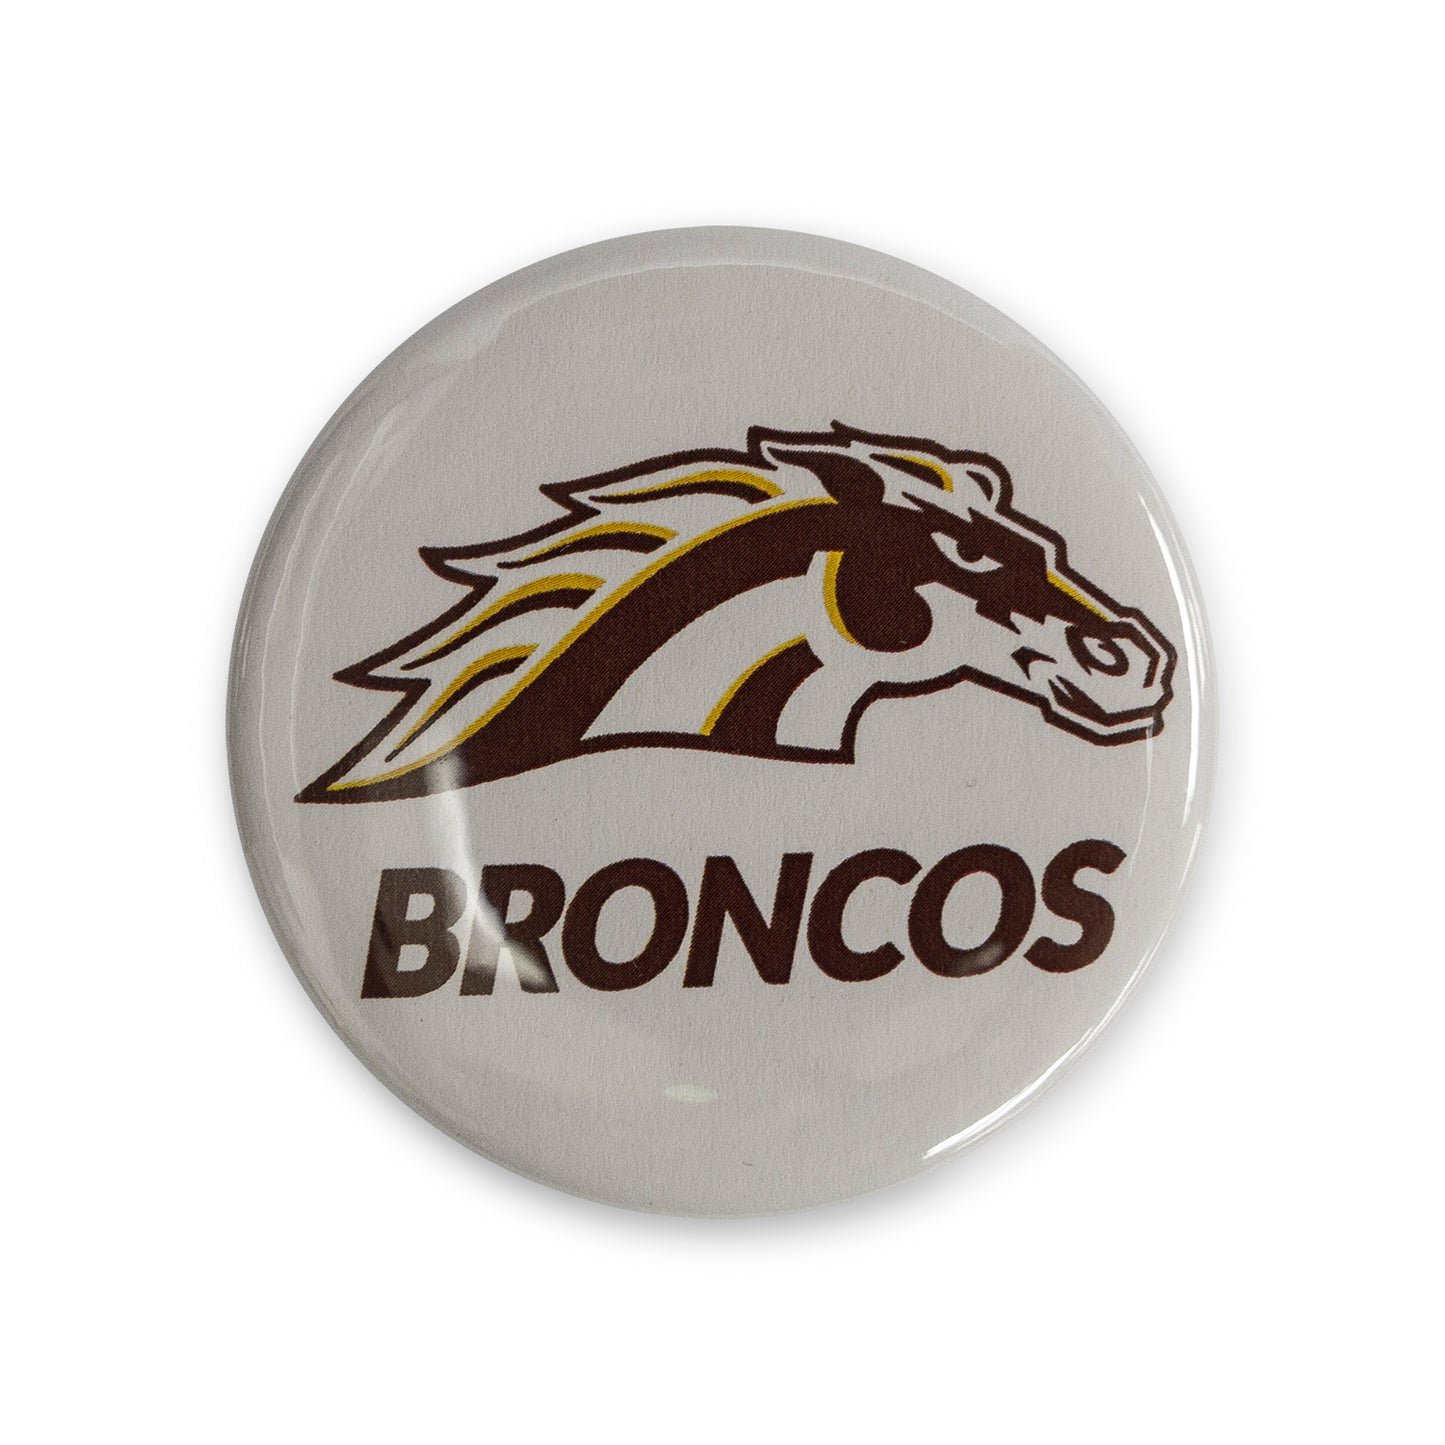 Western Michigan Themed Buttons